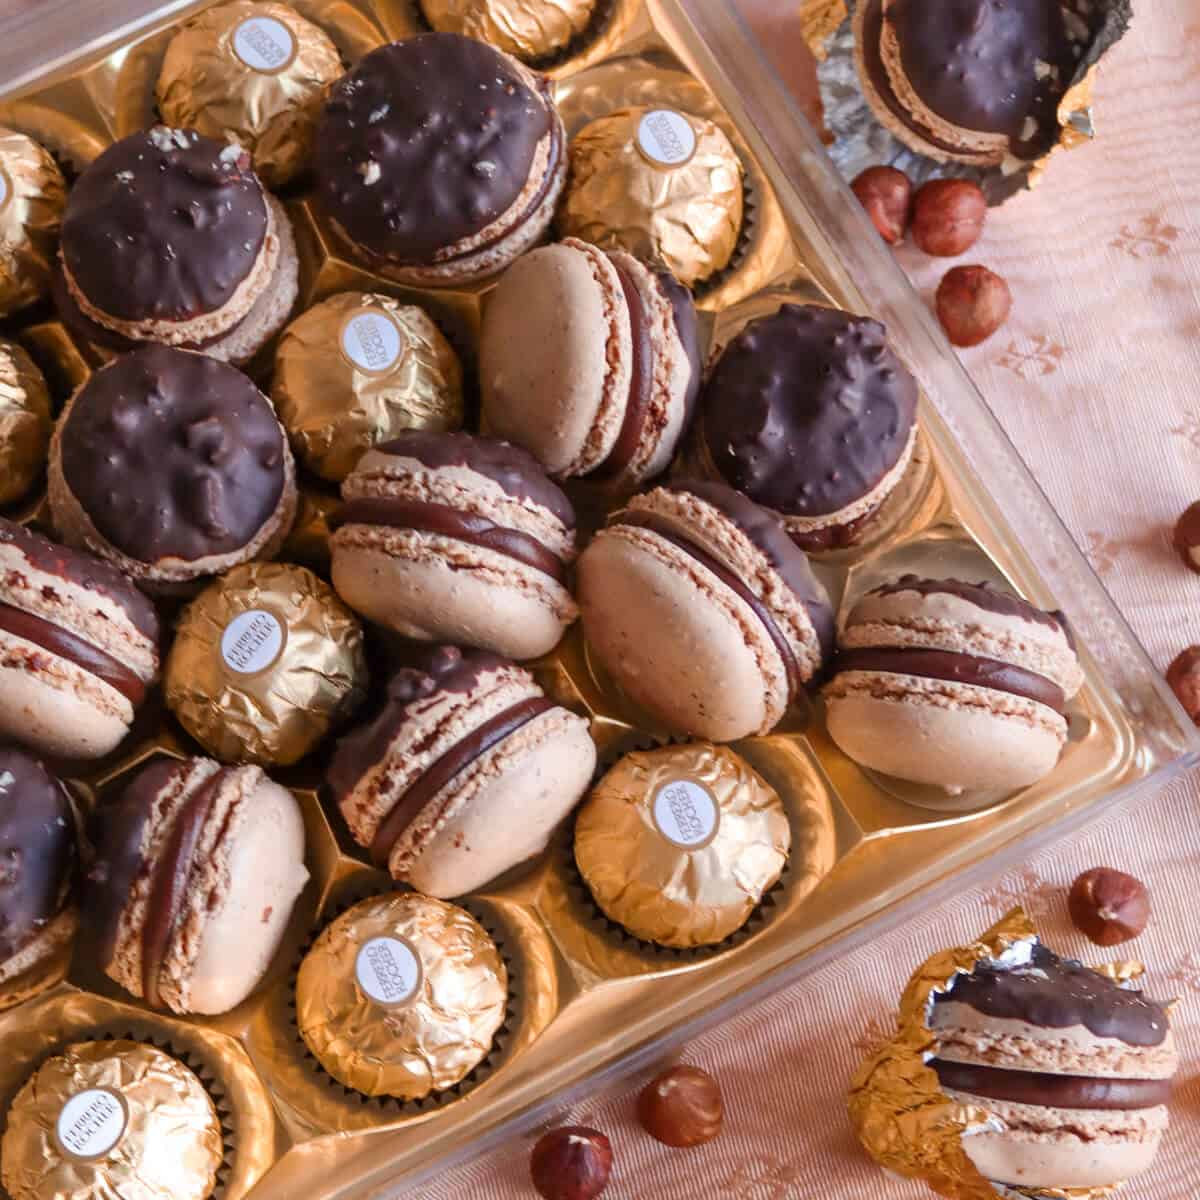 A gold chocolate box tray filled with macarons and Ferrero Rocher chocolates.